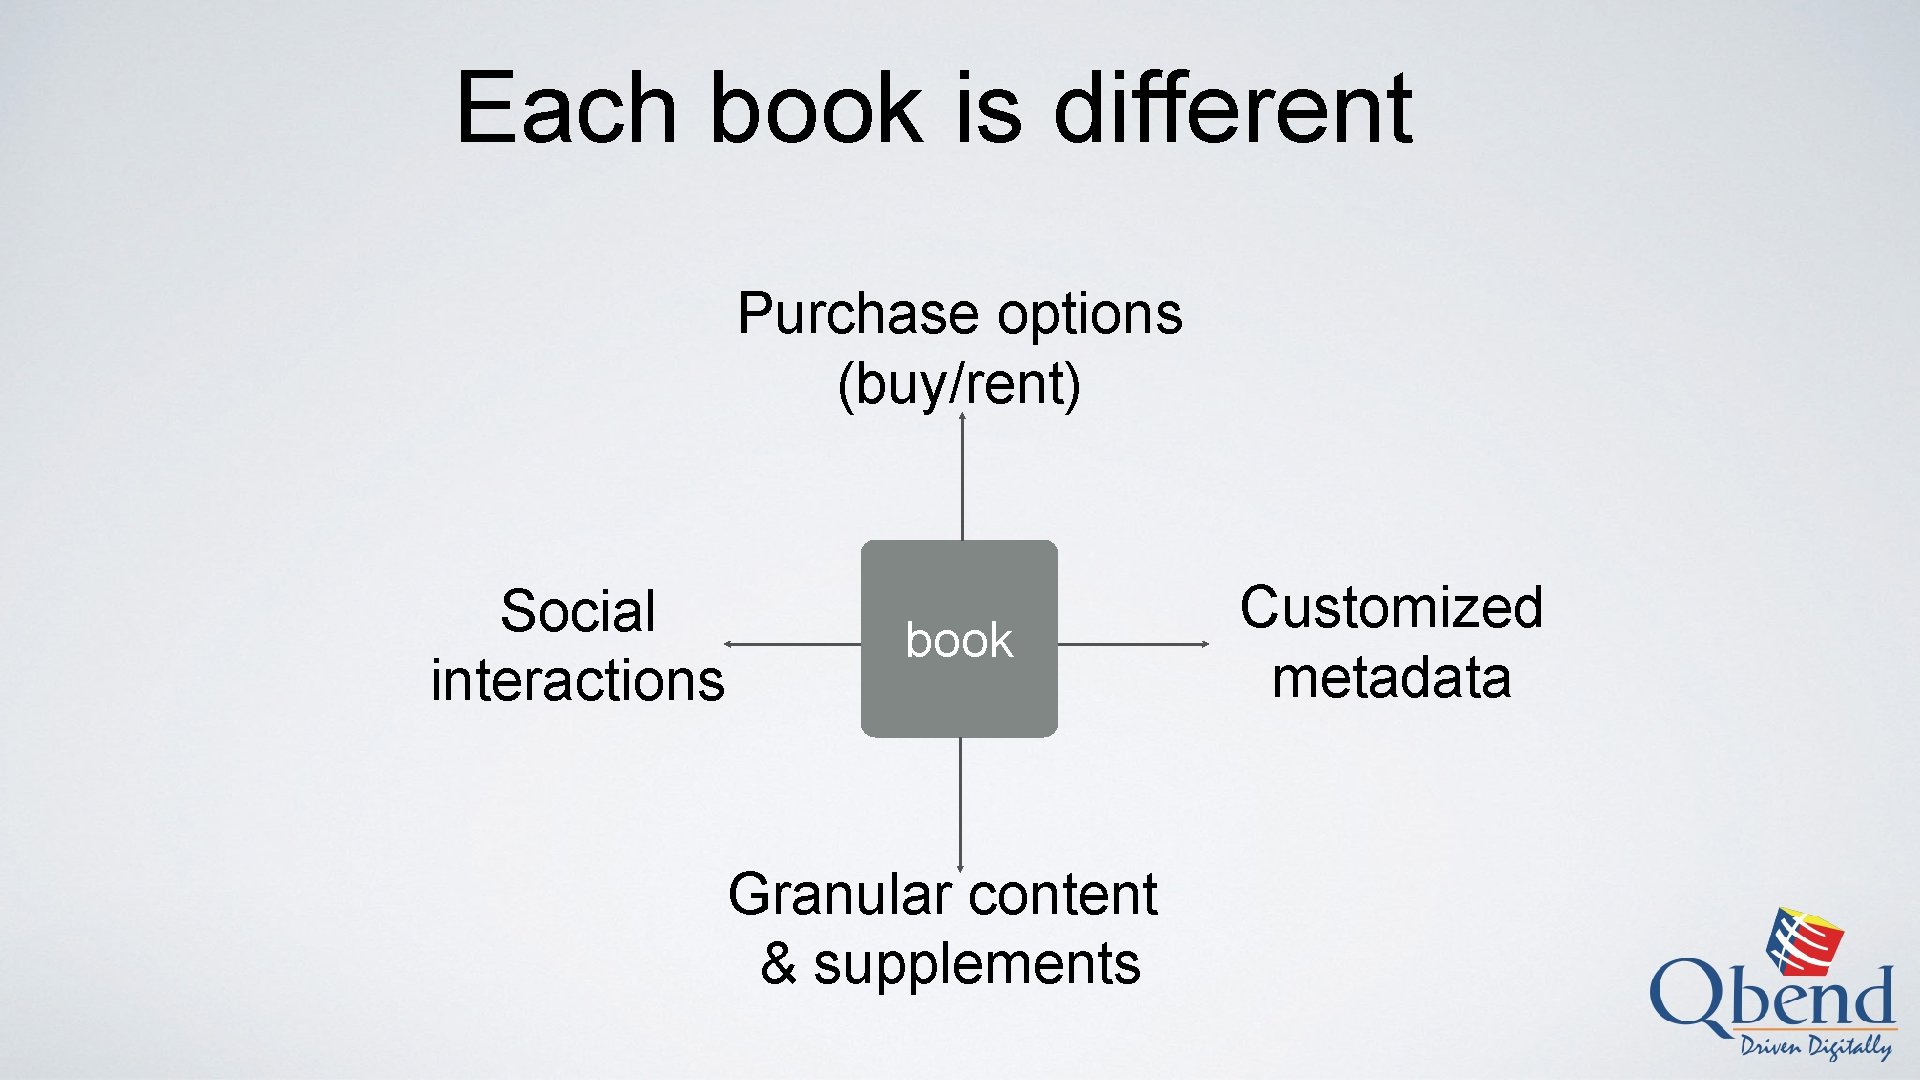 Each book is different Purchase options (buy/rent) Social interactions book Granular content & supplements